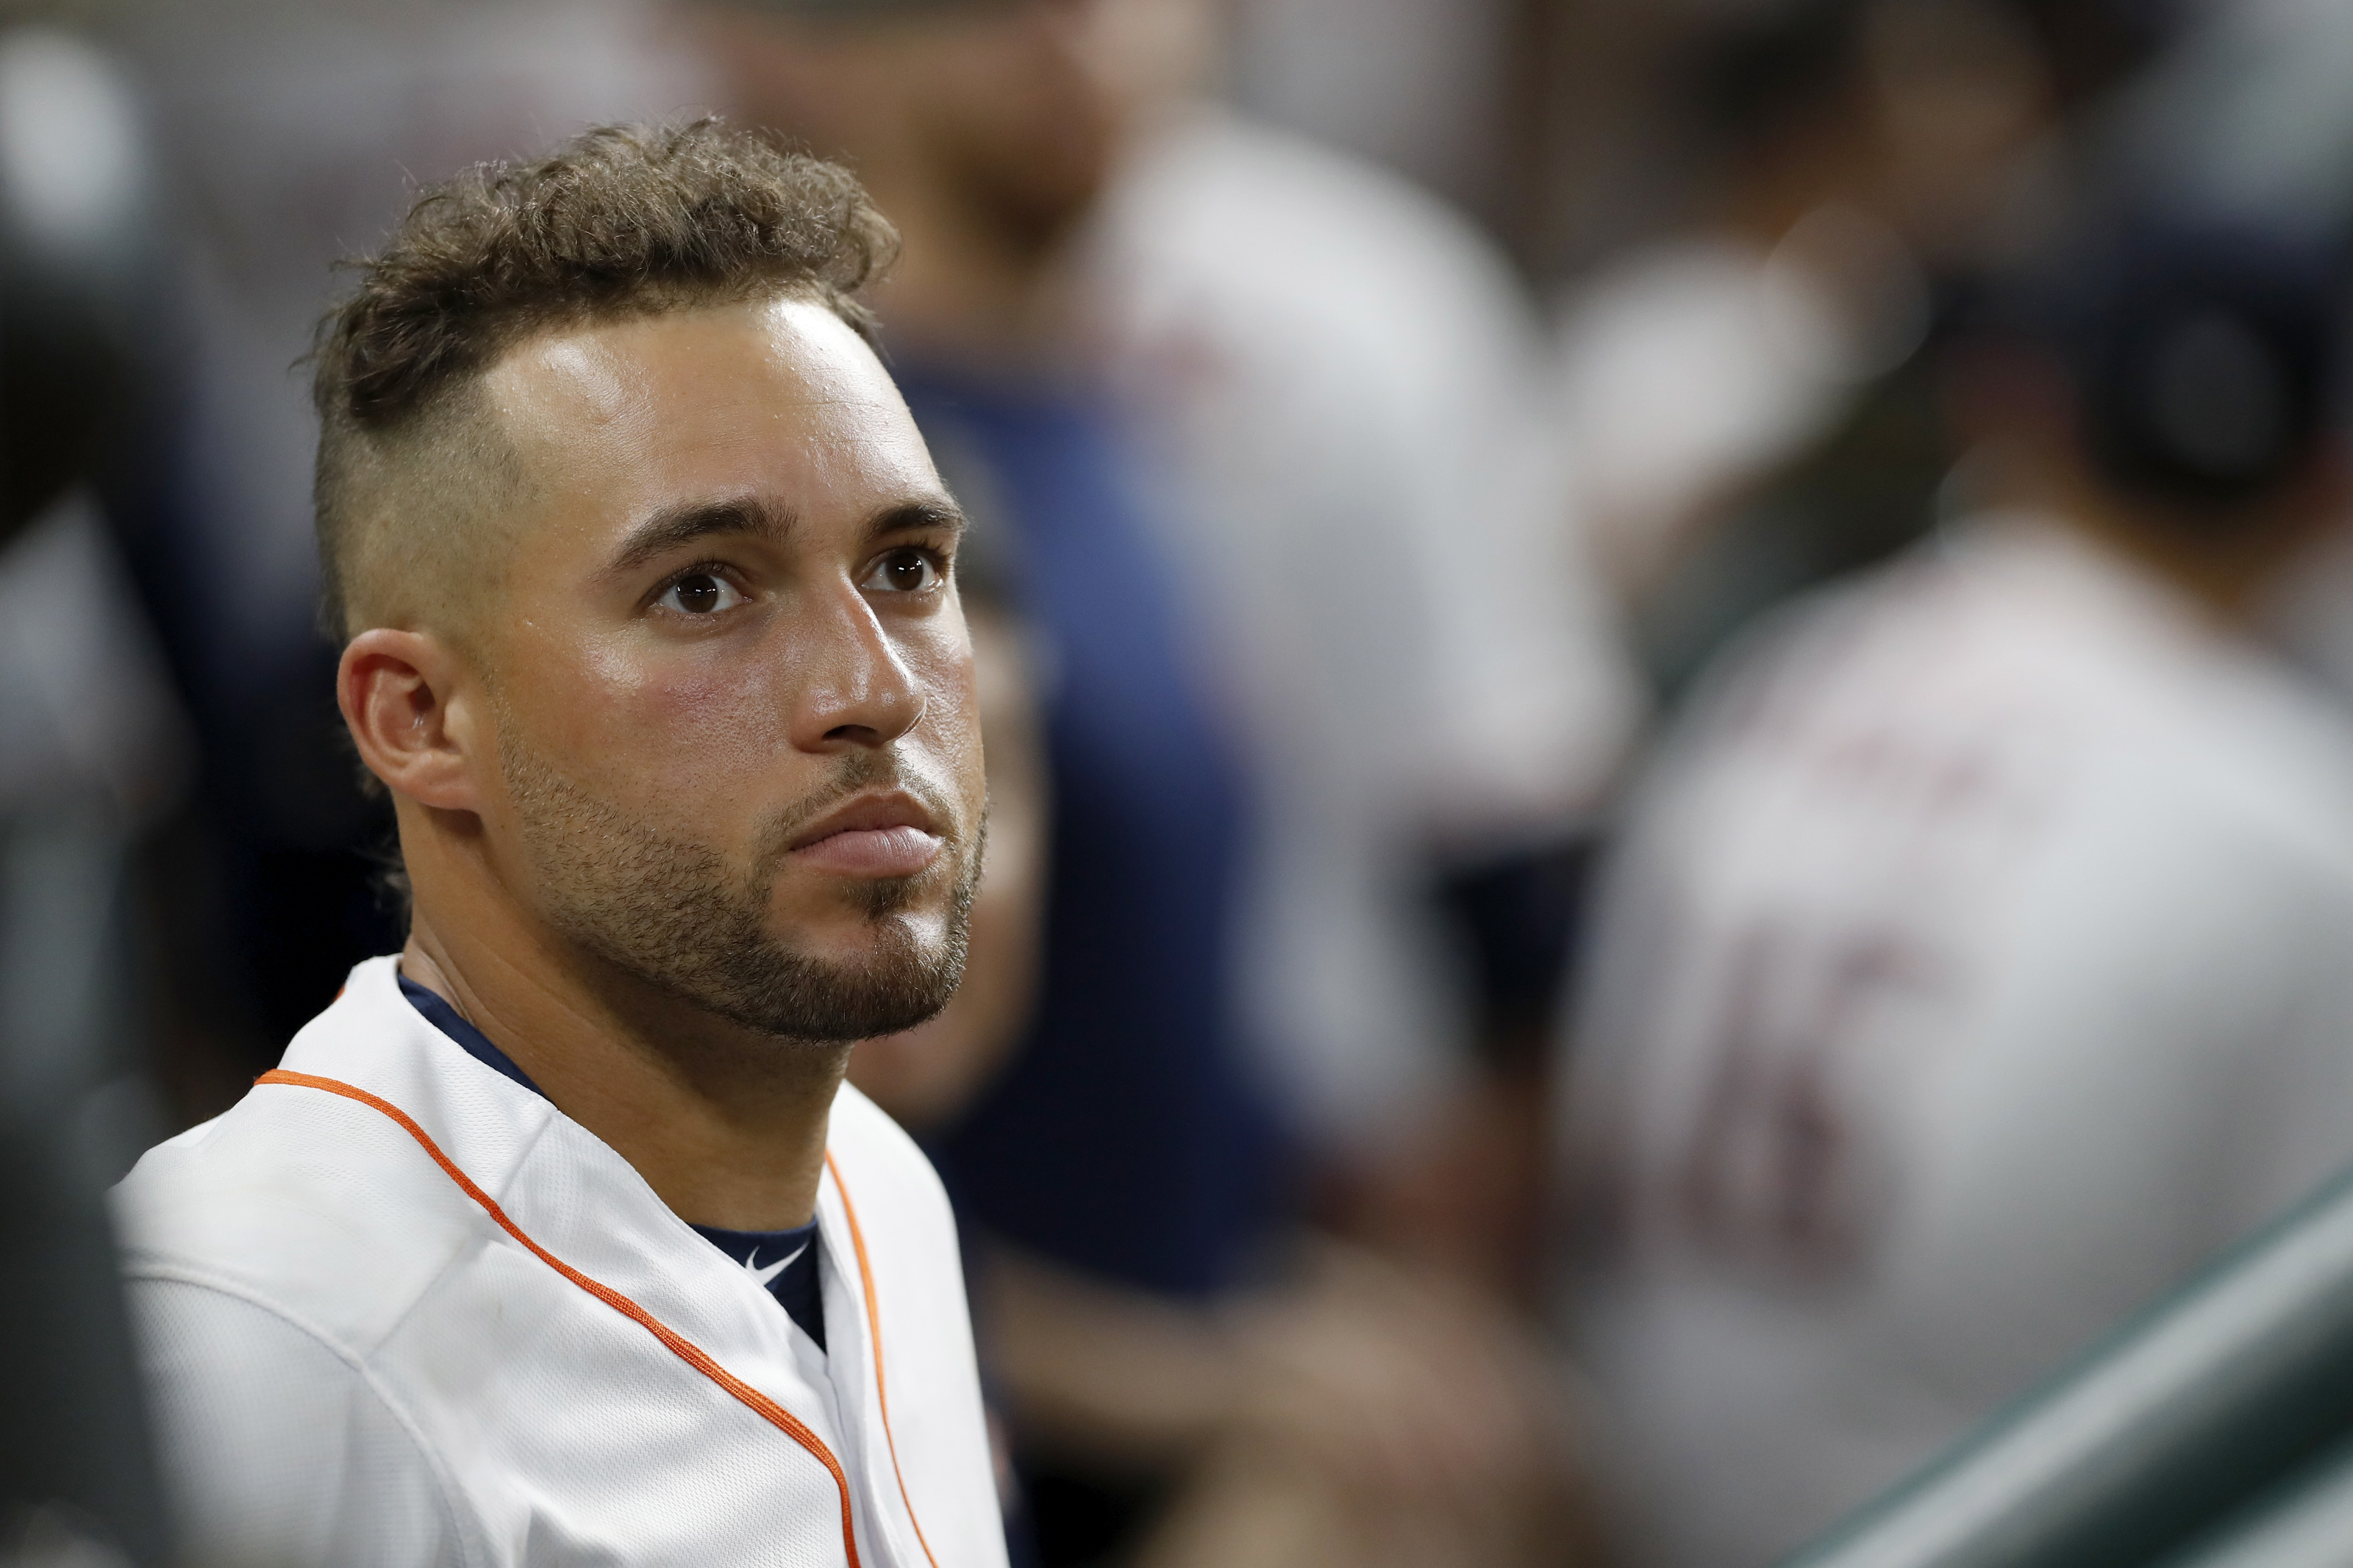 Big League Stew — George Springer has some strong hair game in the